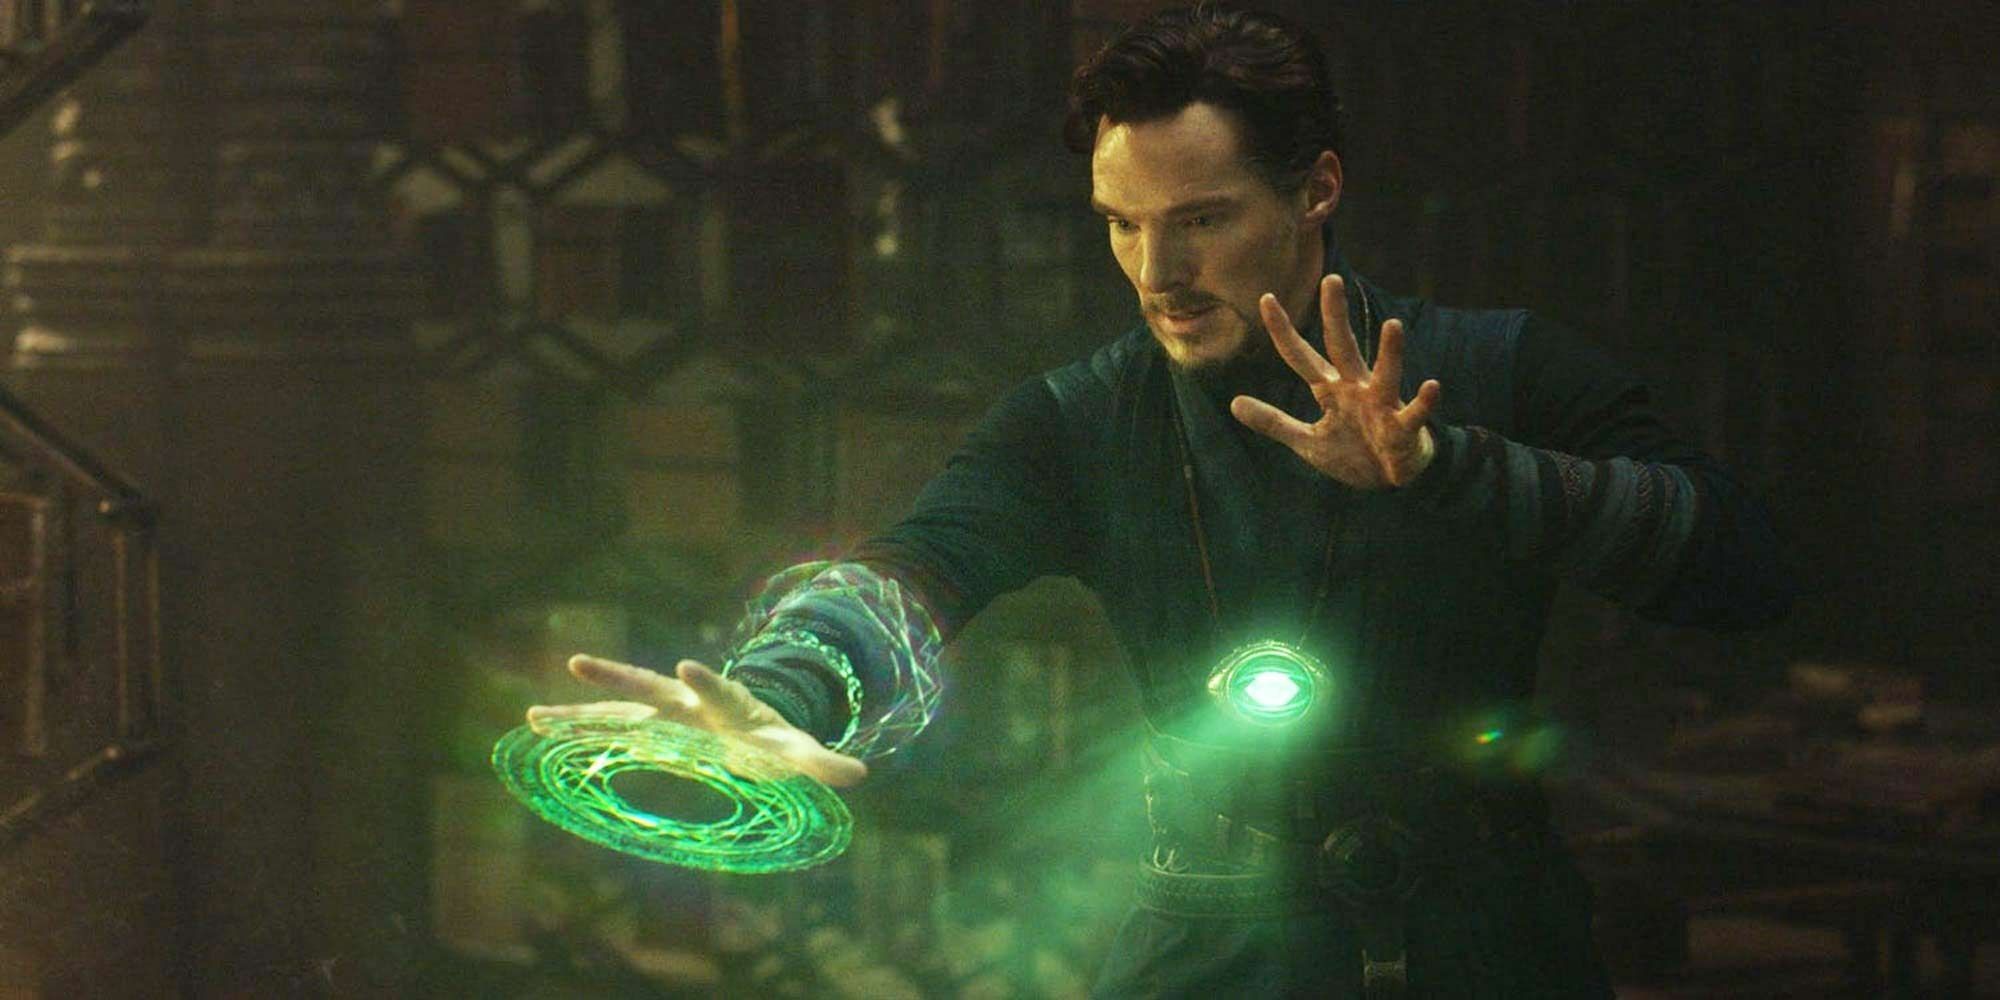 Dr. Strange wielding the Eye of Agamotto to manipulate time with the Time Stone within